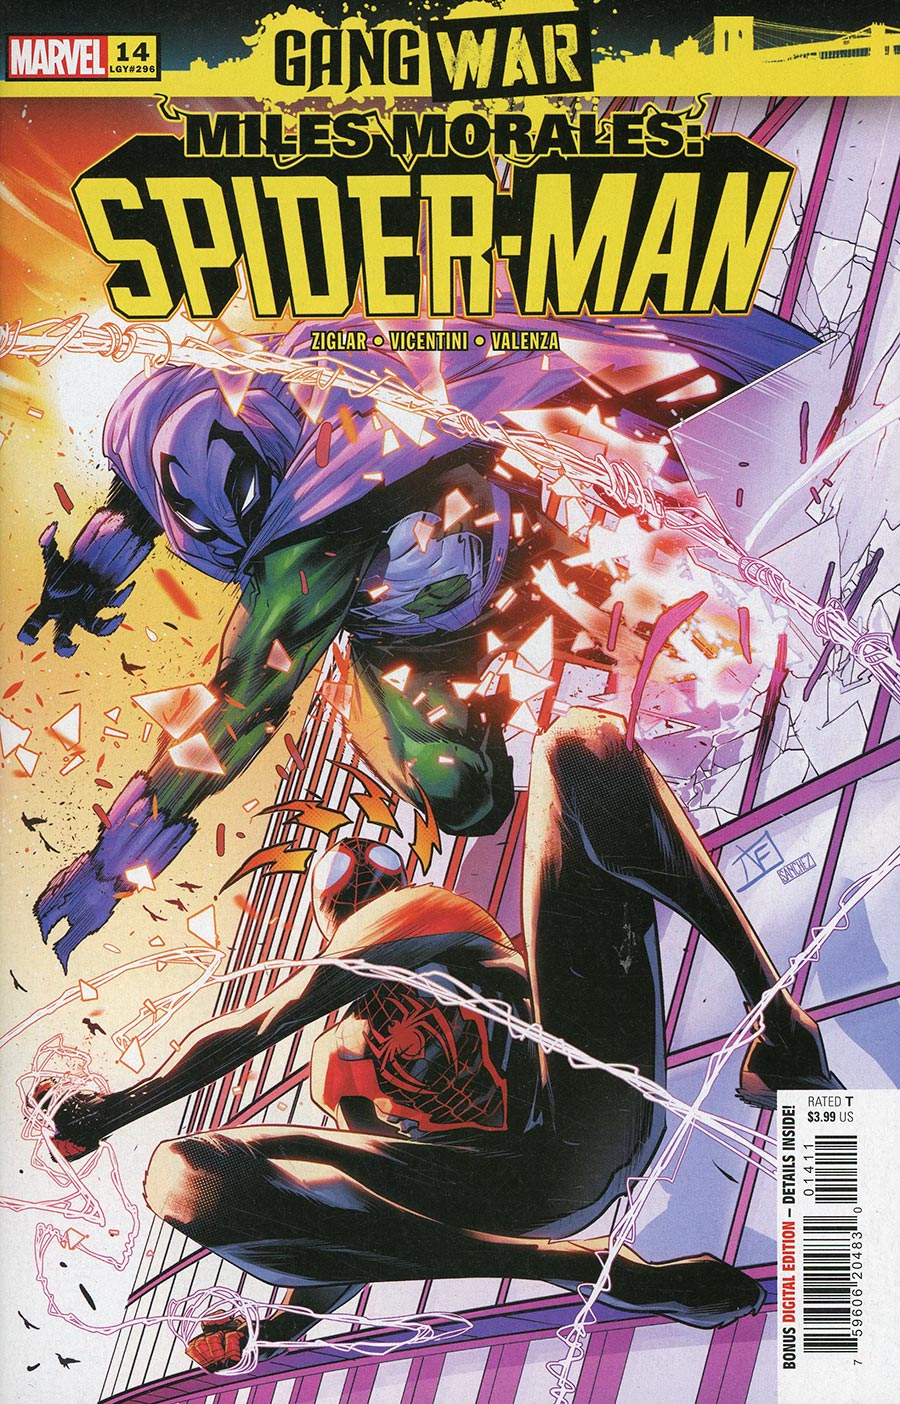 Miles Morales Spider-Man Vol 2 #14 Cover A Regular Federico Vicentini Cover (Gang War Tie-In)